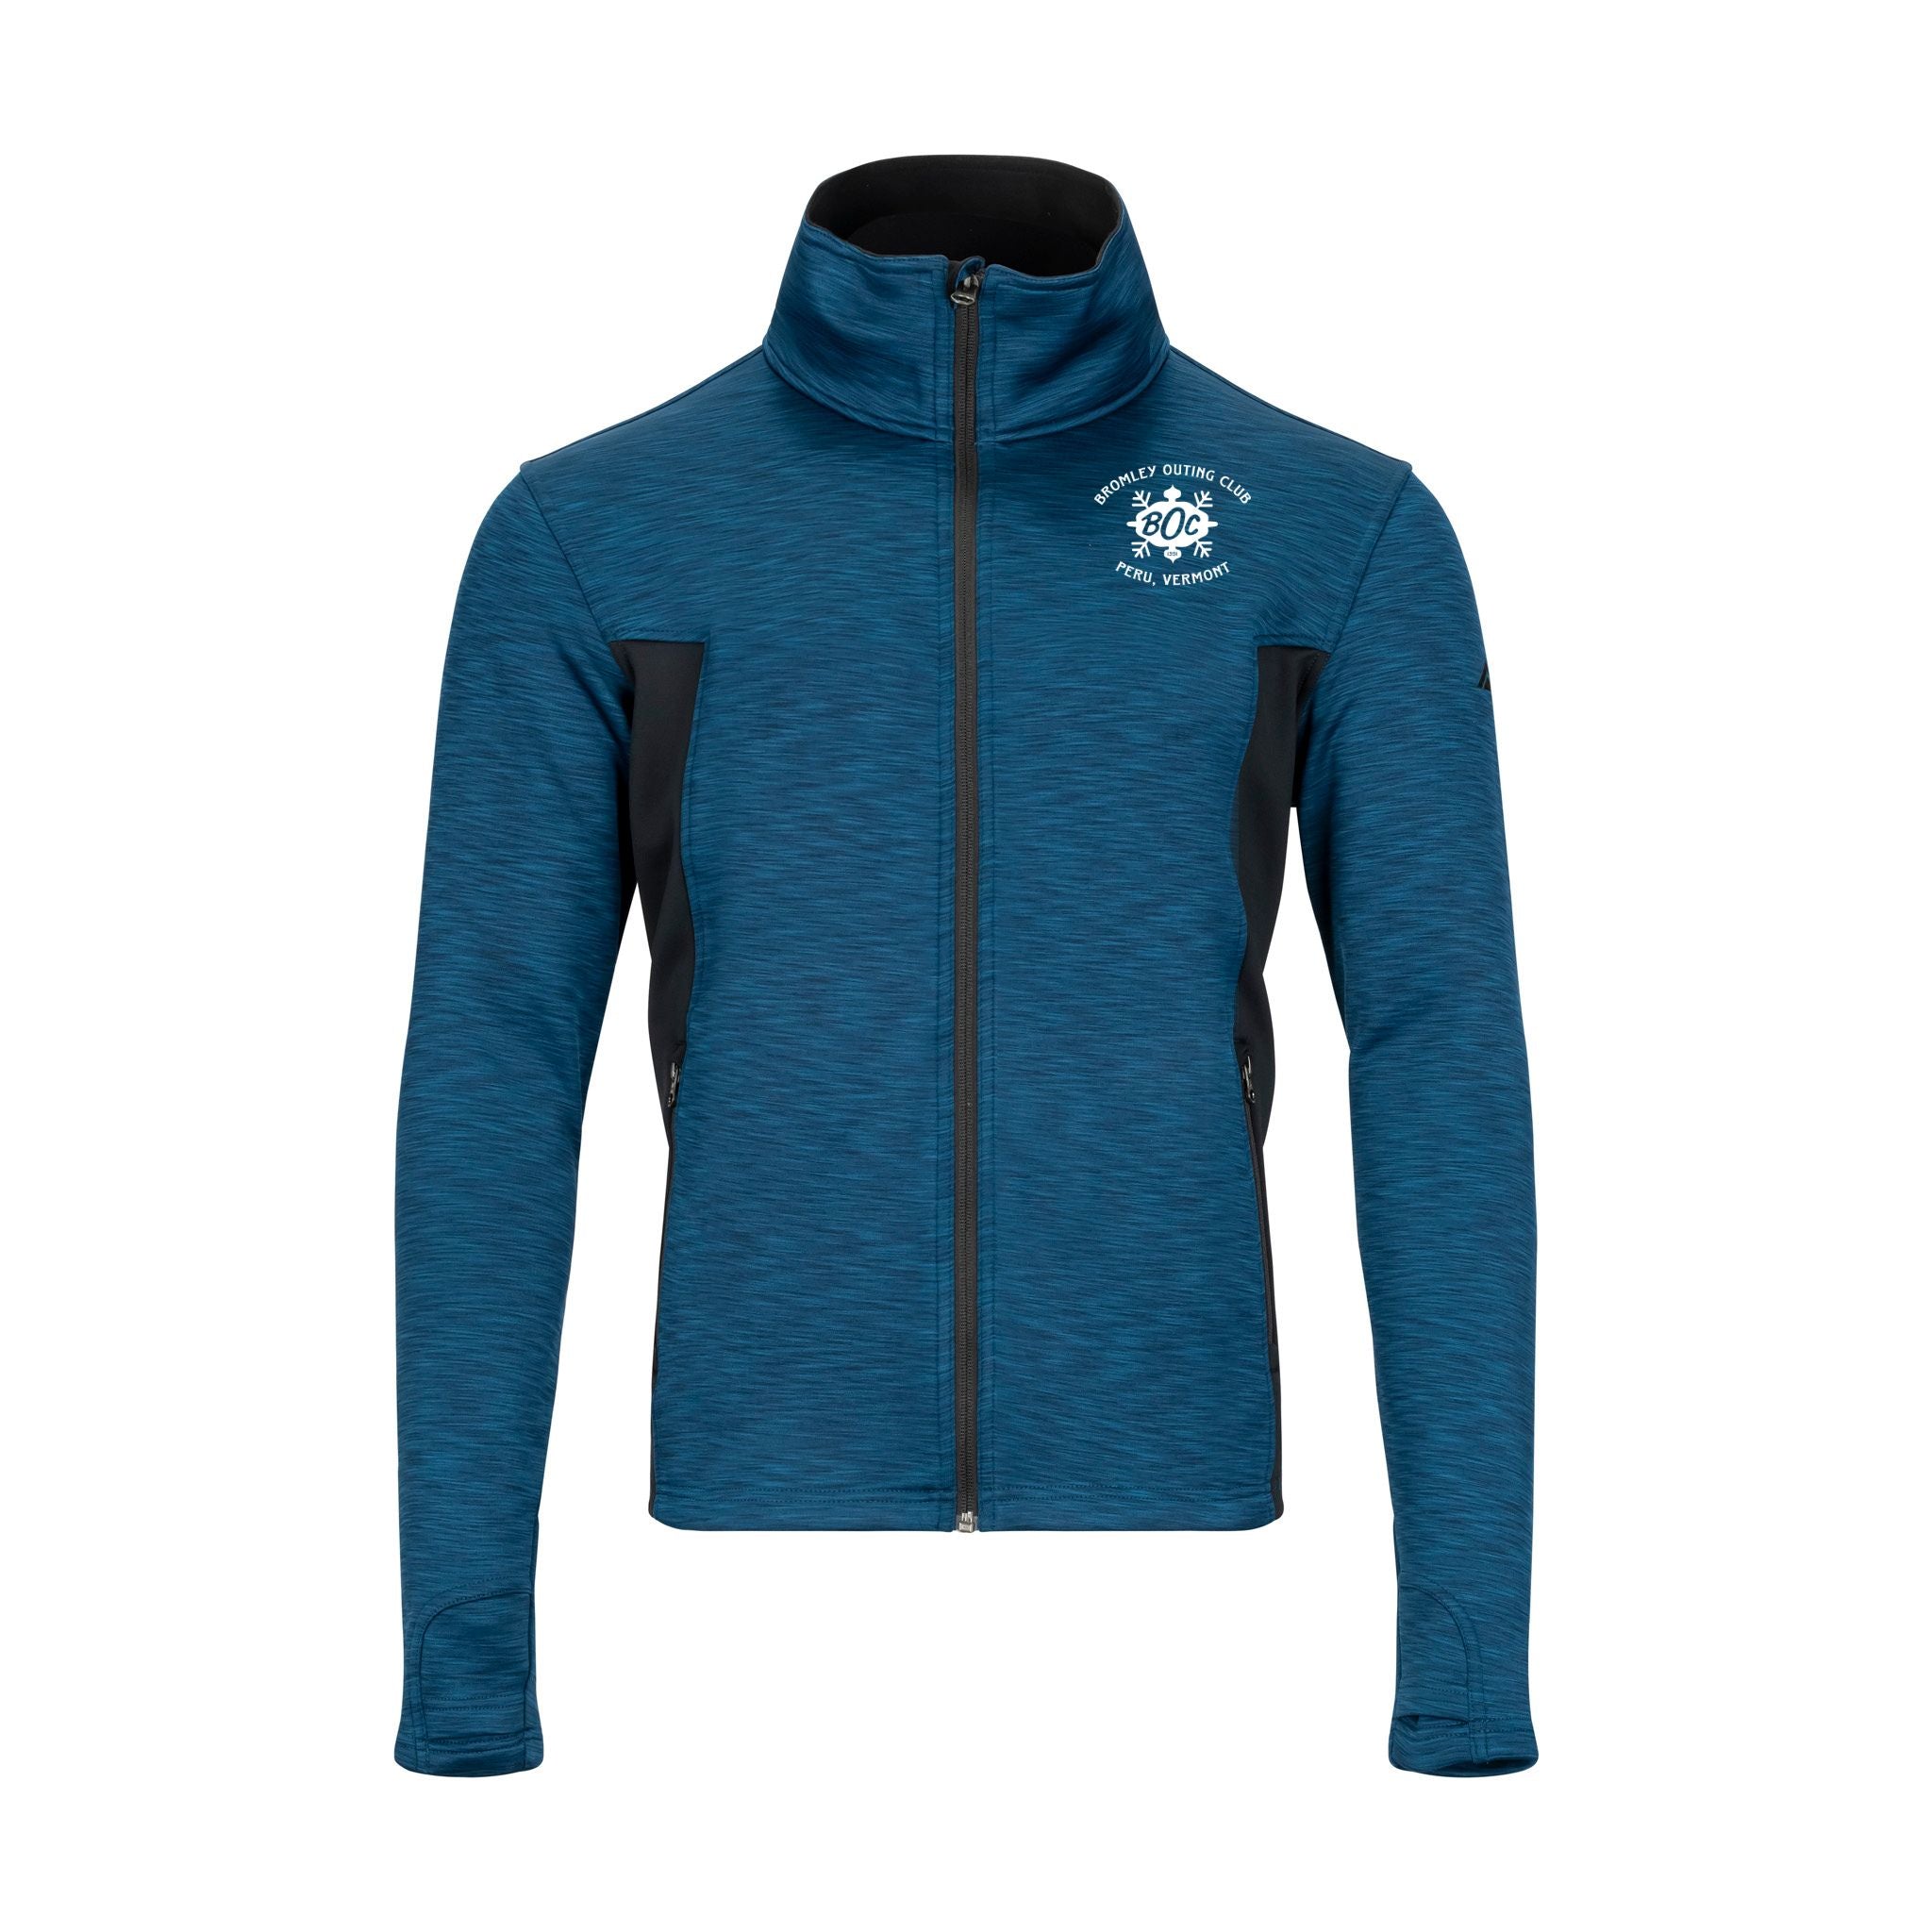 Men's Benchmark Jacket - Bromley Outing Club